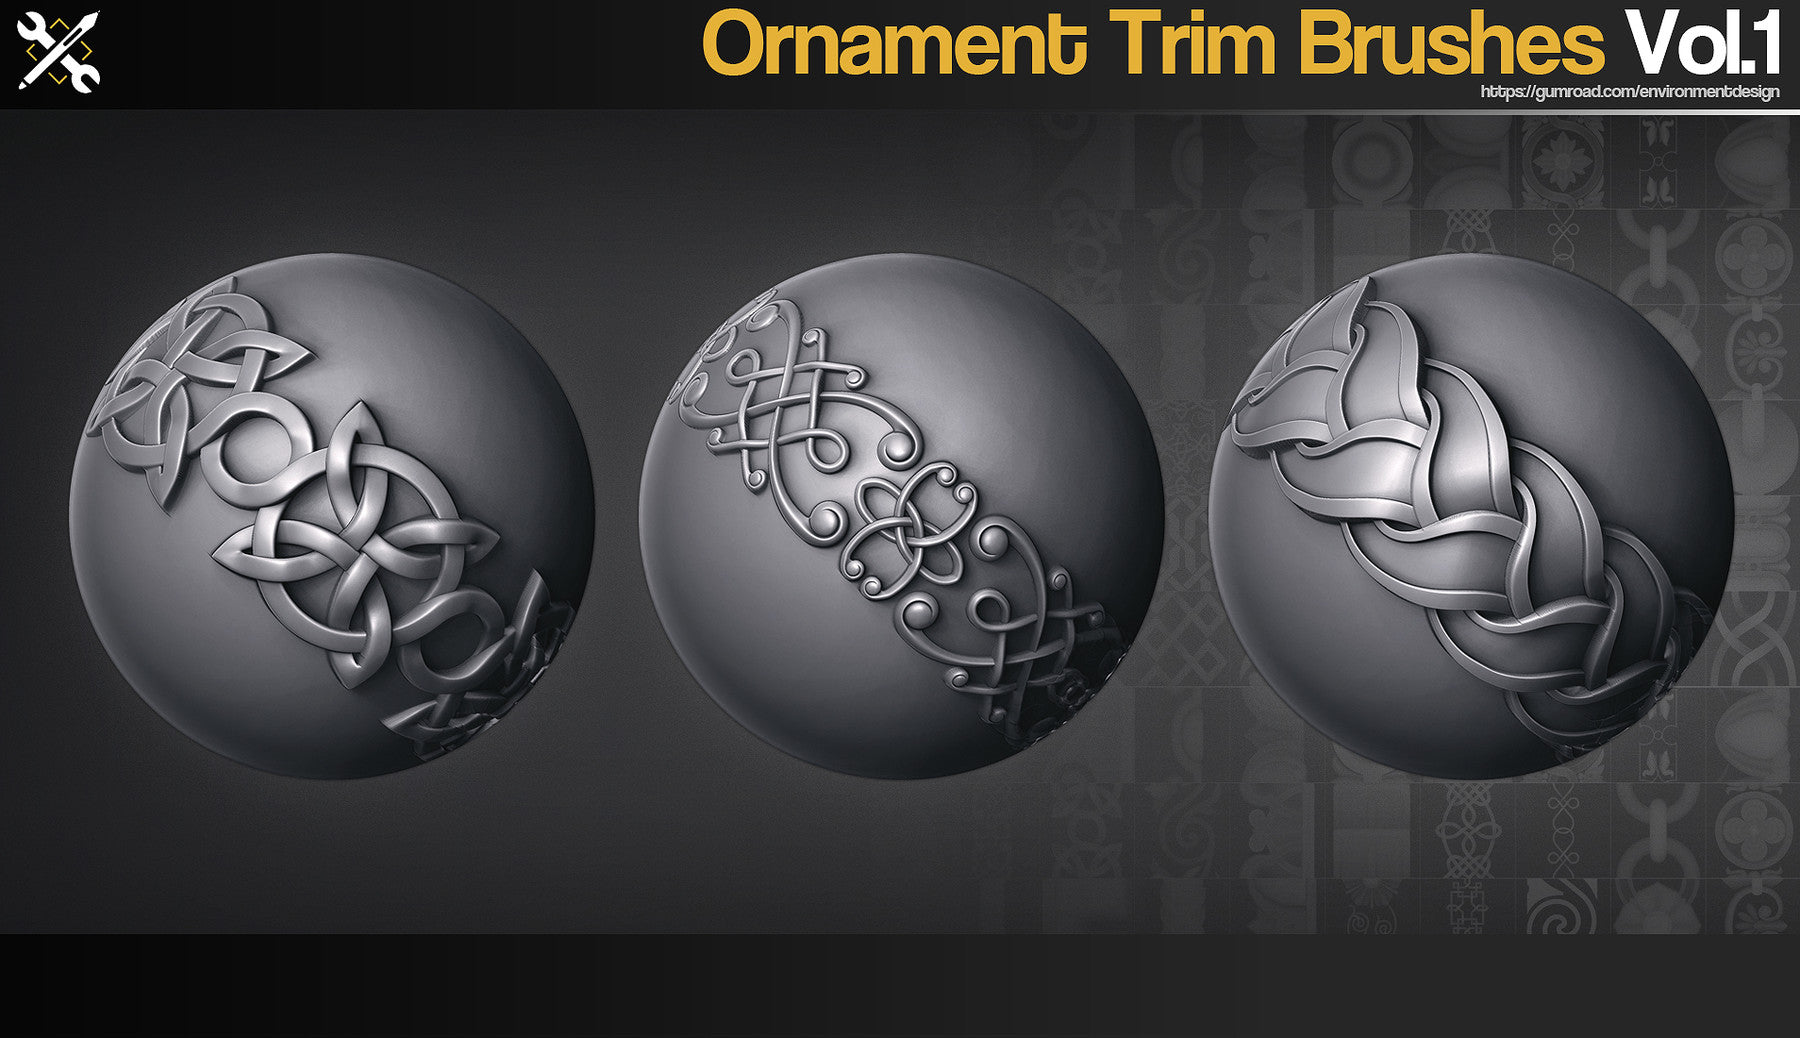 60 Ornament Trim Brushes for ZBrush Vol.1